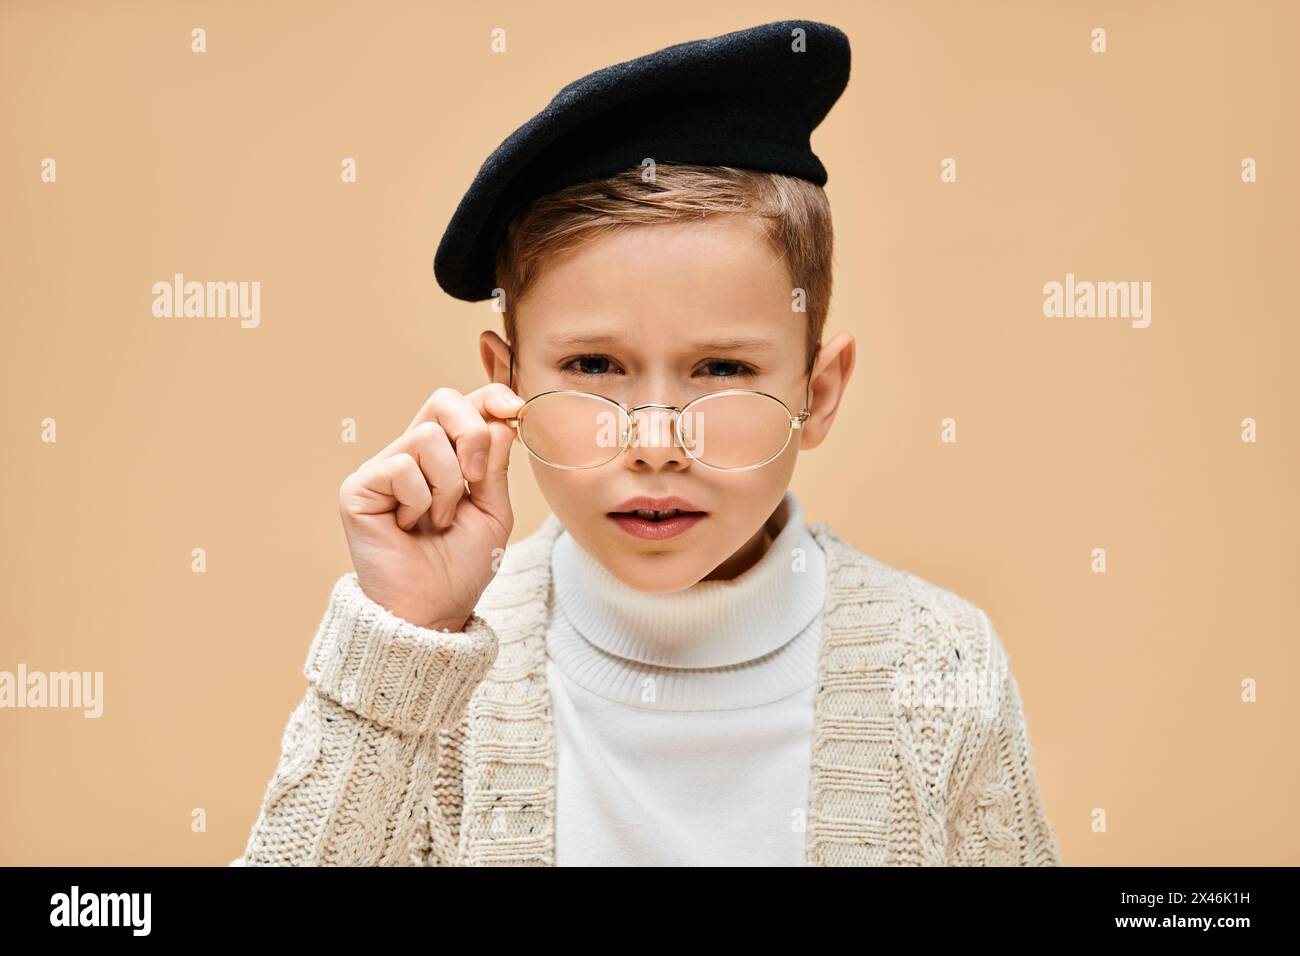 Preadolescent boy in glasses and hat, dressed as a film director on a beige backdrop. Stock Photo